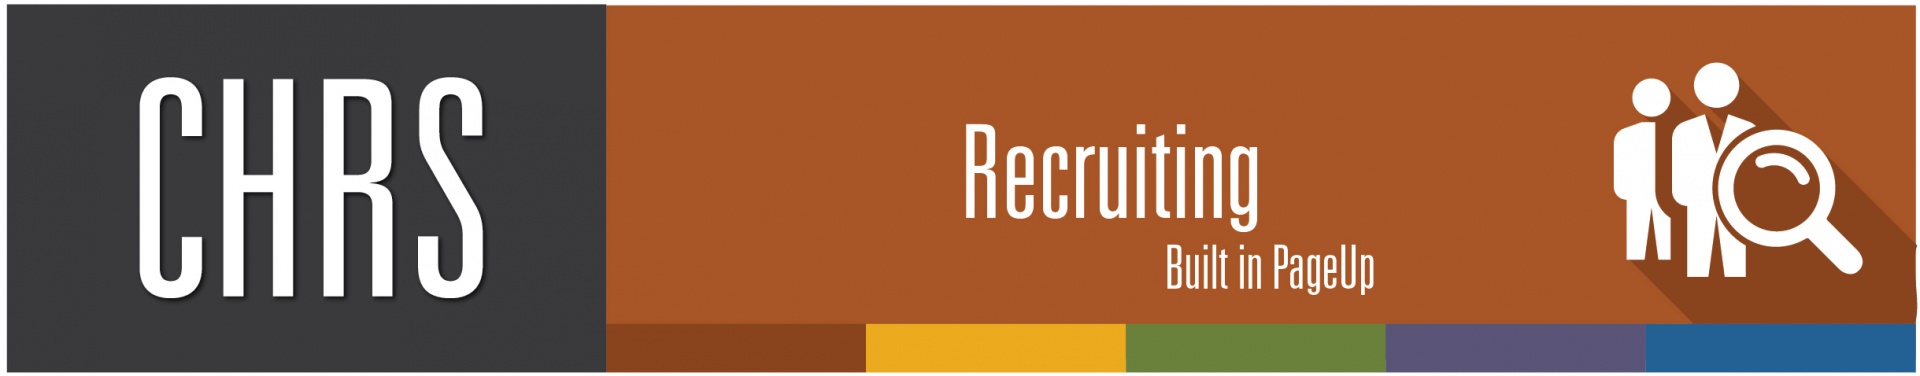 CHRS Recruiting Built in PageUp